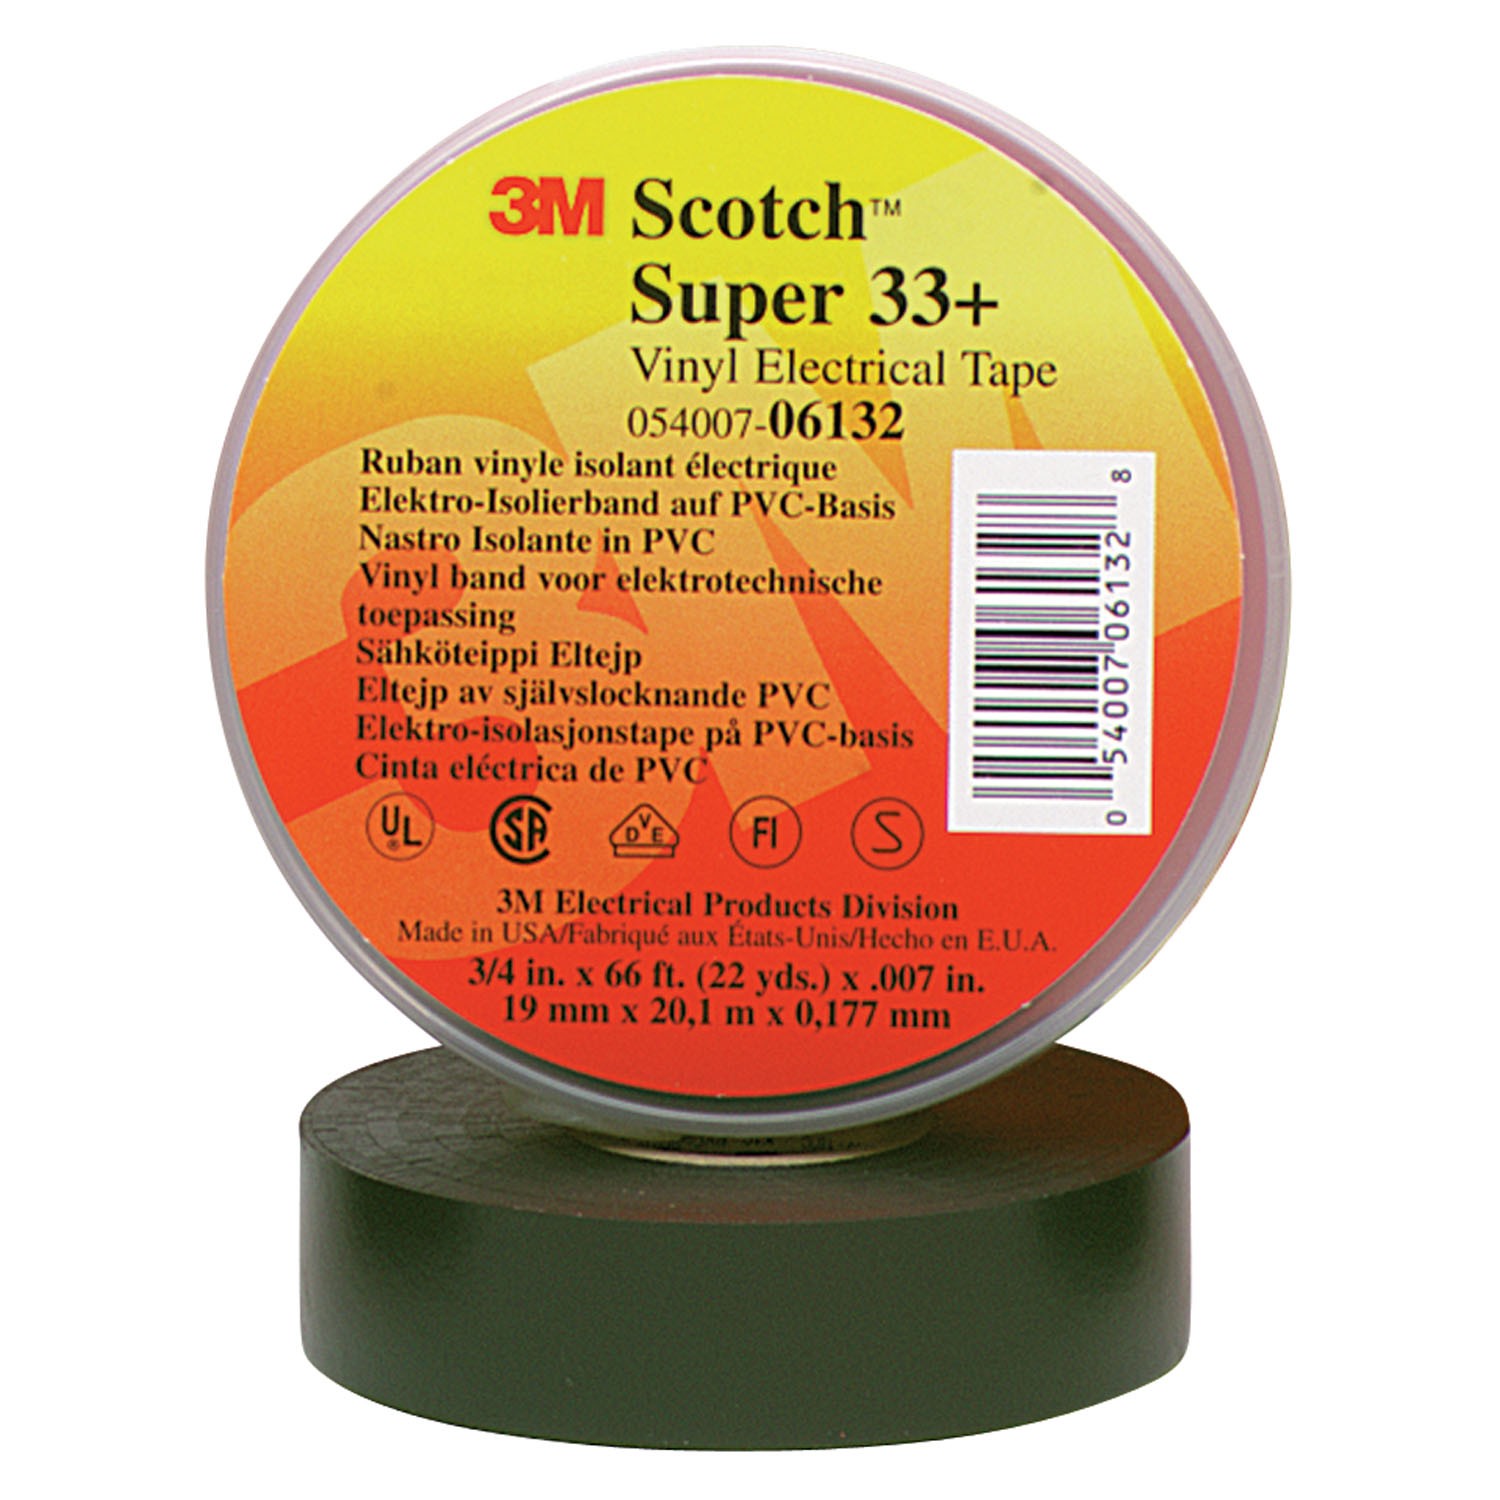 1/2" 3M Scotch Super 33+ Vinyl Electrical Tape with Non-Thermosetting Rubber Adhesive, black, 1/2" wide x  36 YD roll